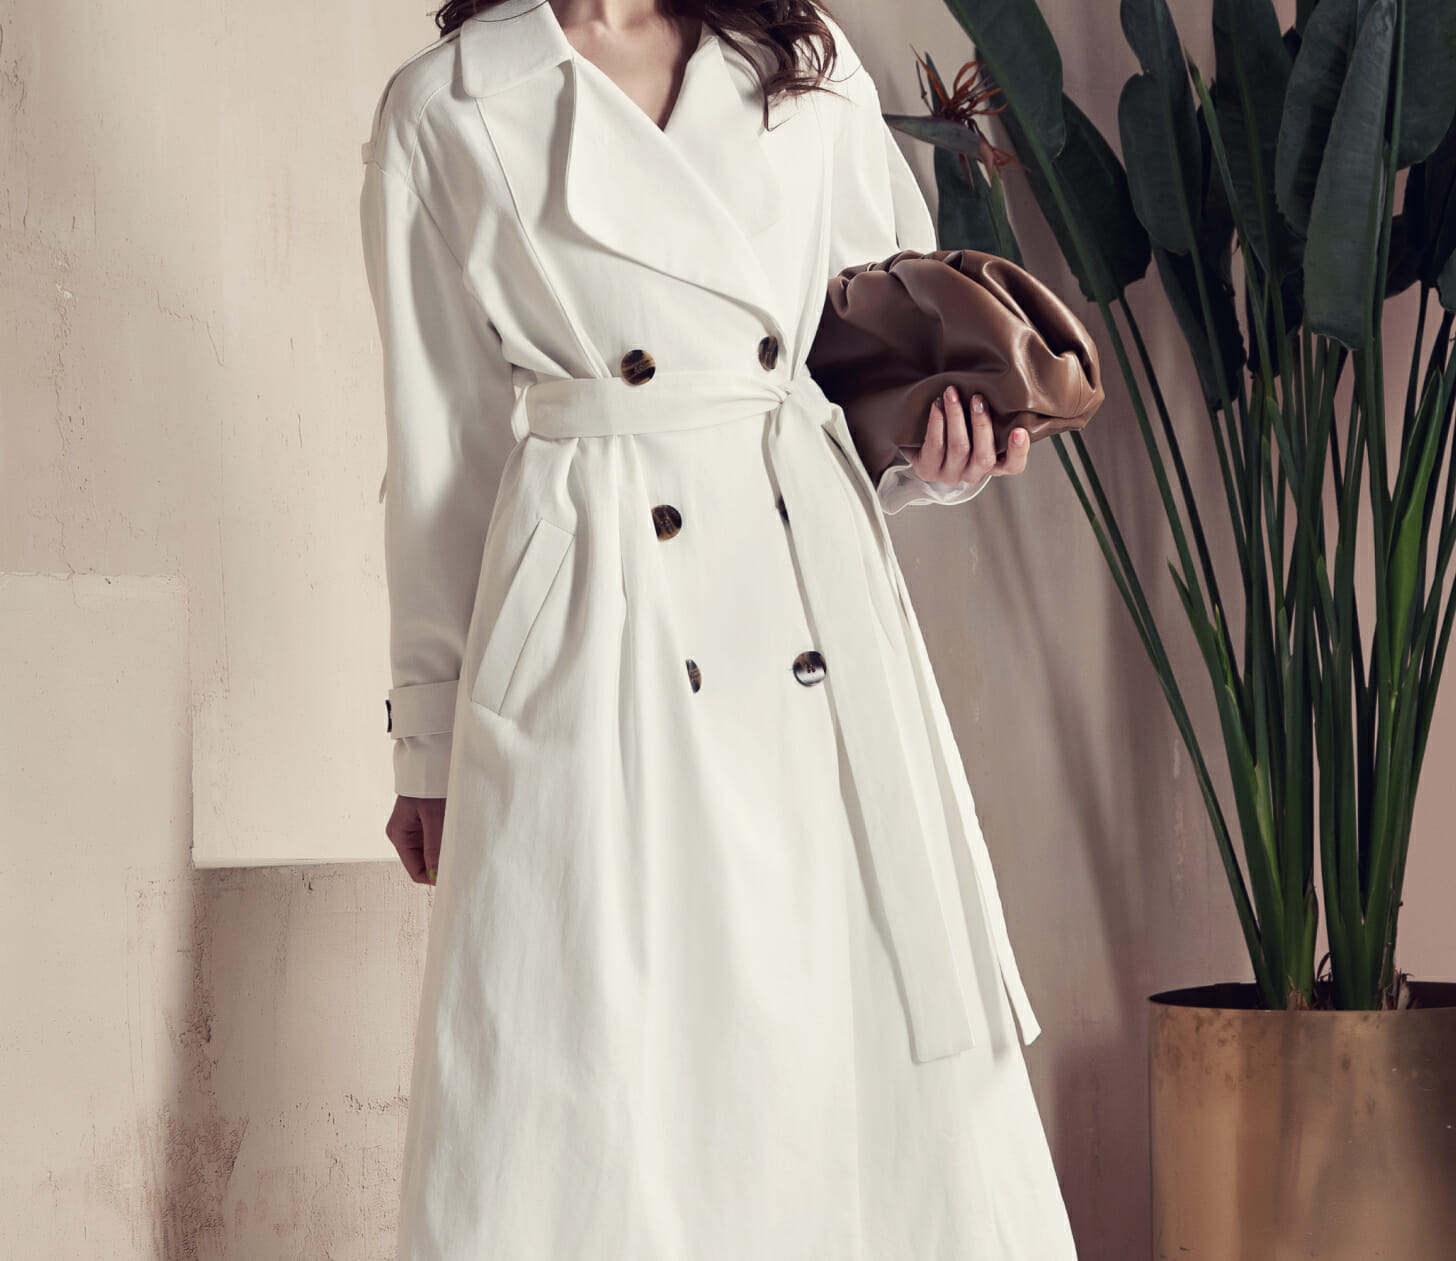 Female fashion model posing in a white belted peacoat near a potted plant.